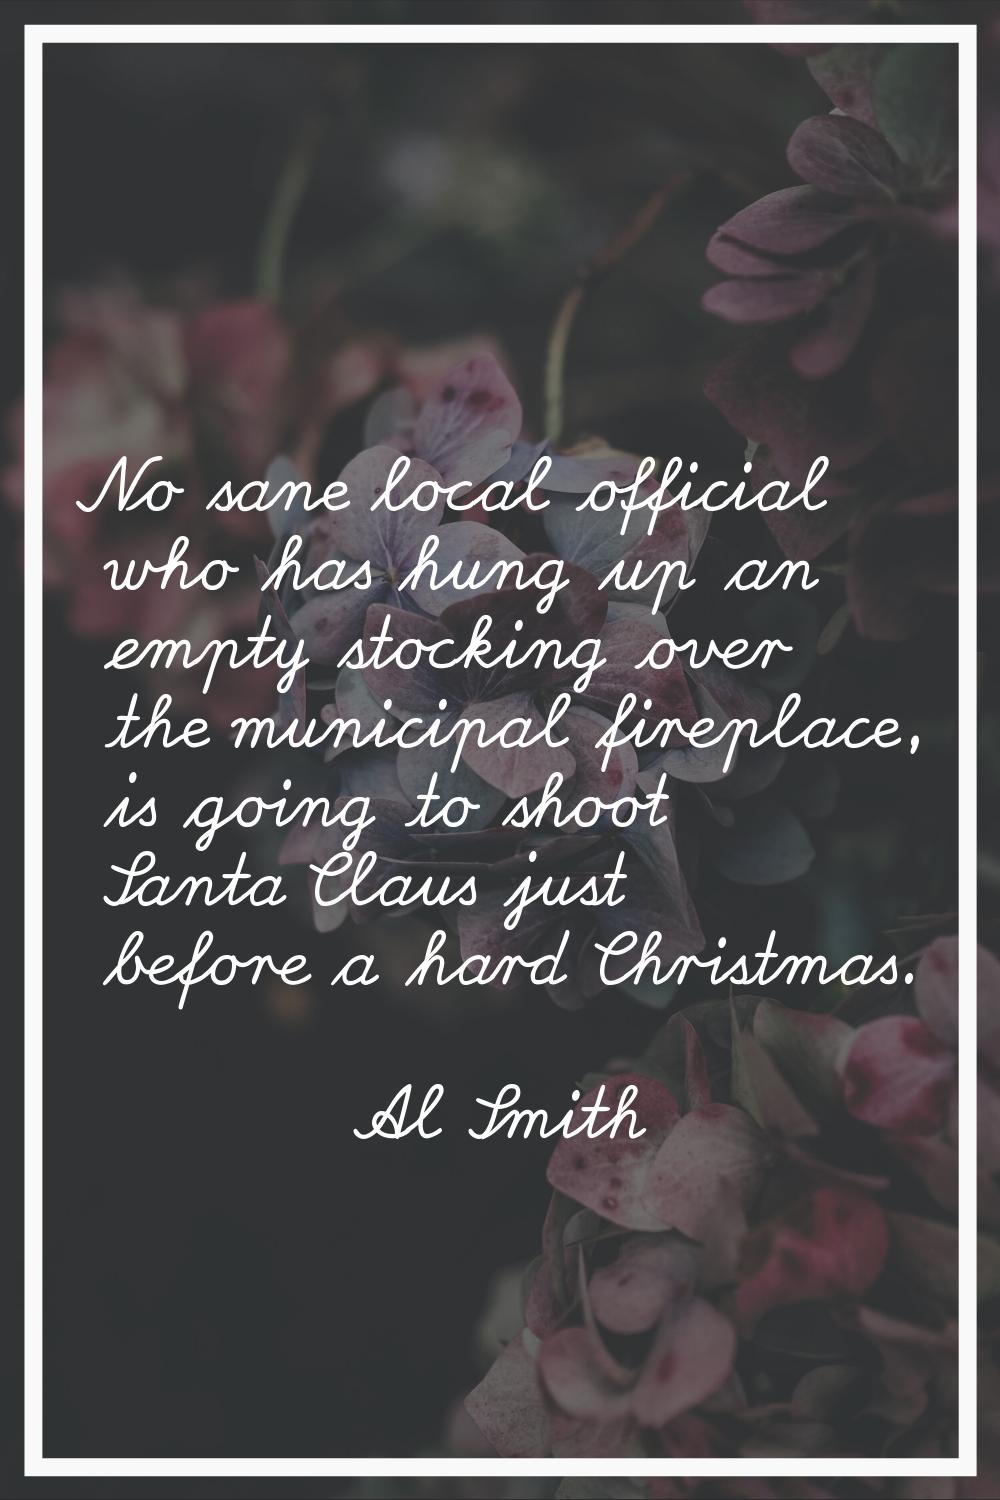 No sane local official who has hung up an empty stocking over the municipal fireplace, is going to 